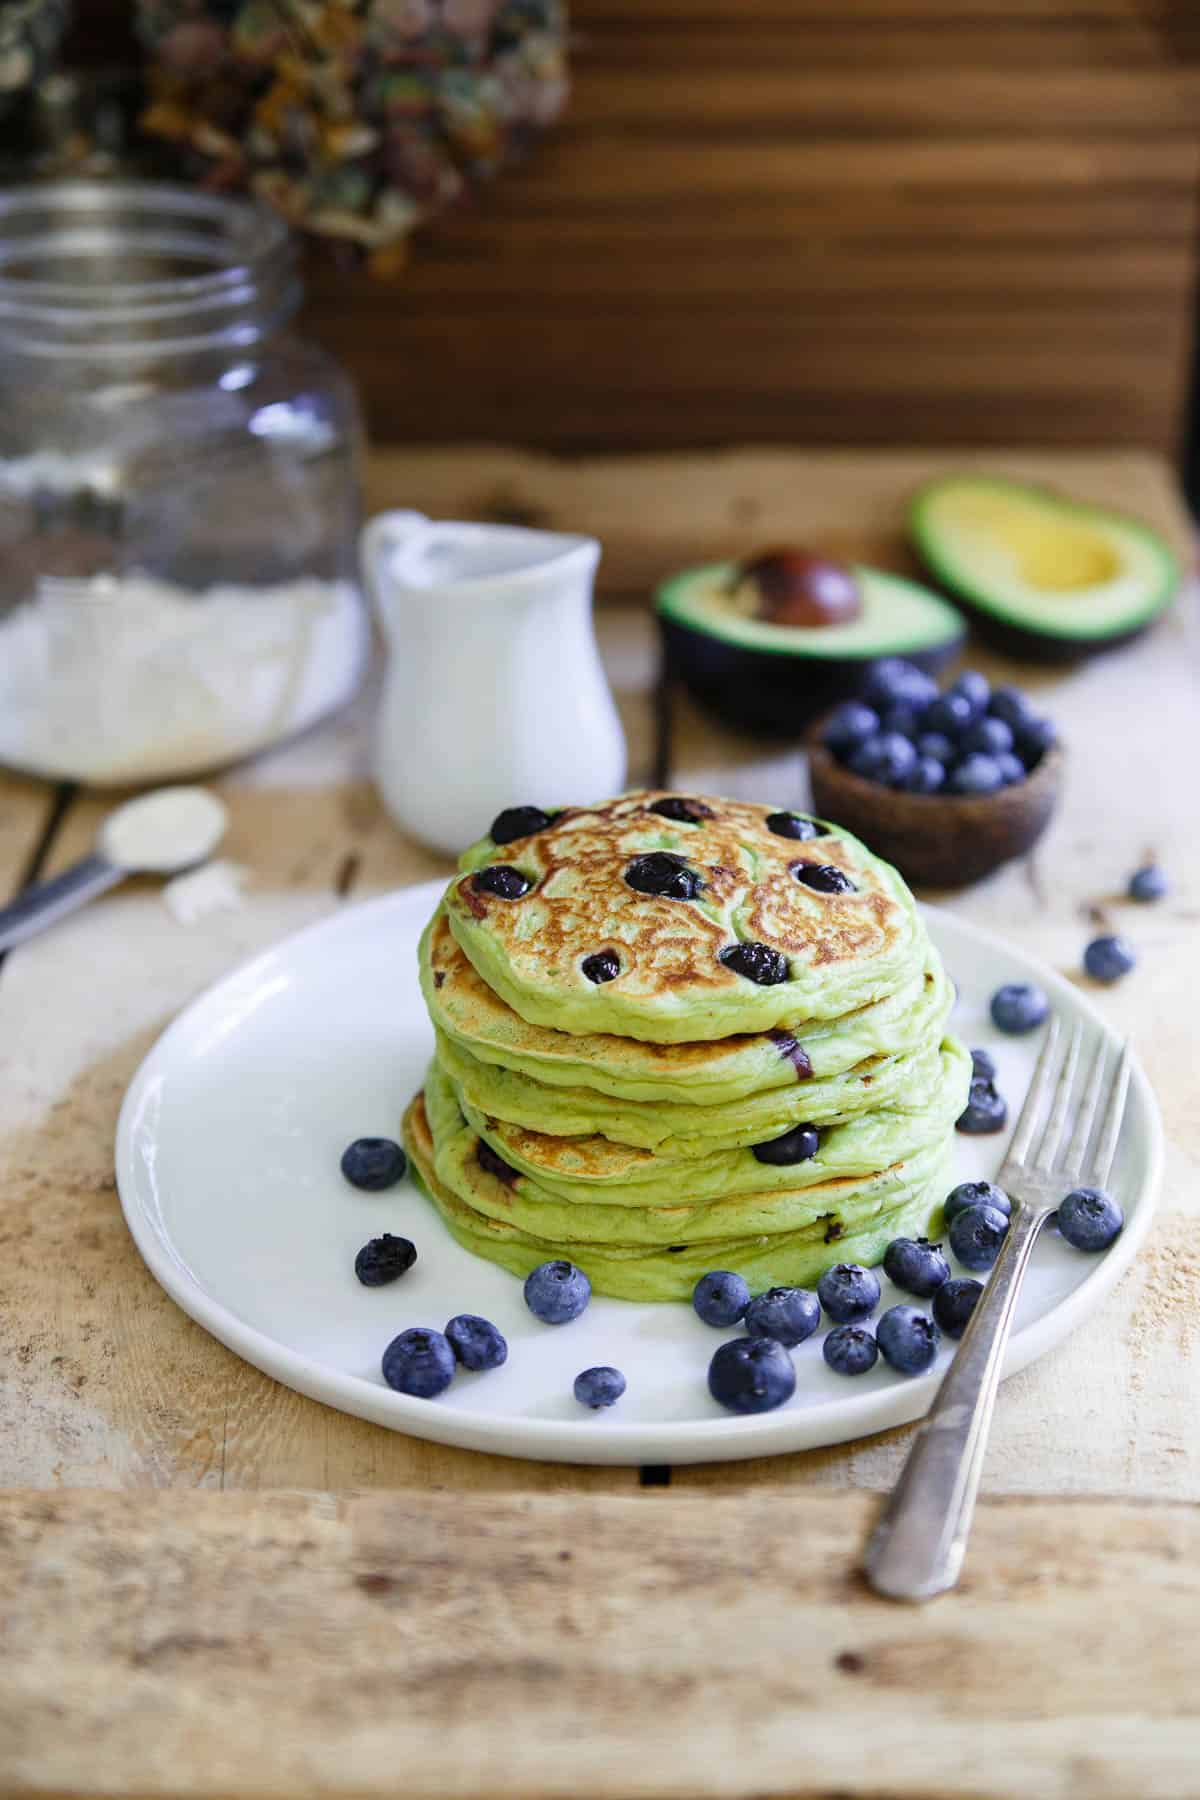 These avocado pancakes are packed with fresh blueberries, fluffy, thick and when topped with a poached egg, the perfect combination of savory and sweet.